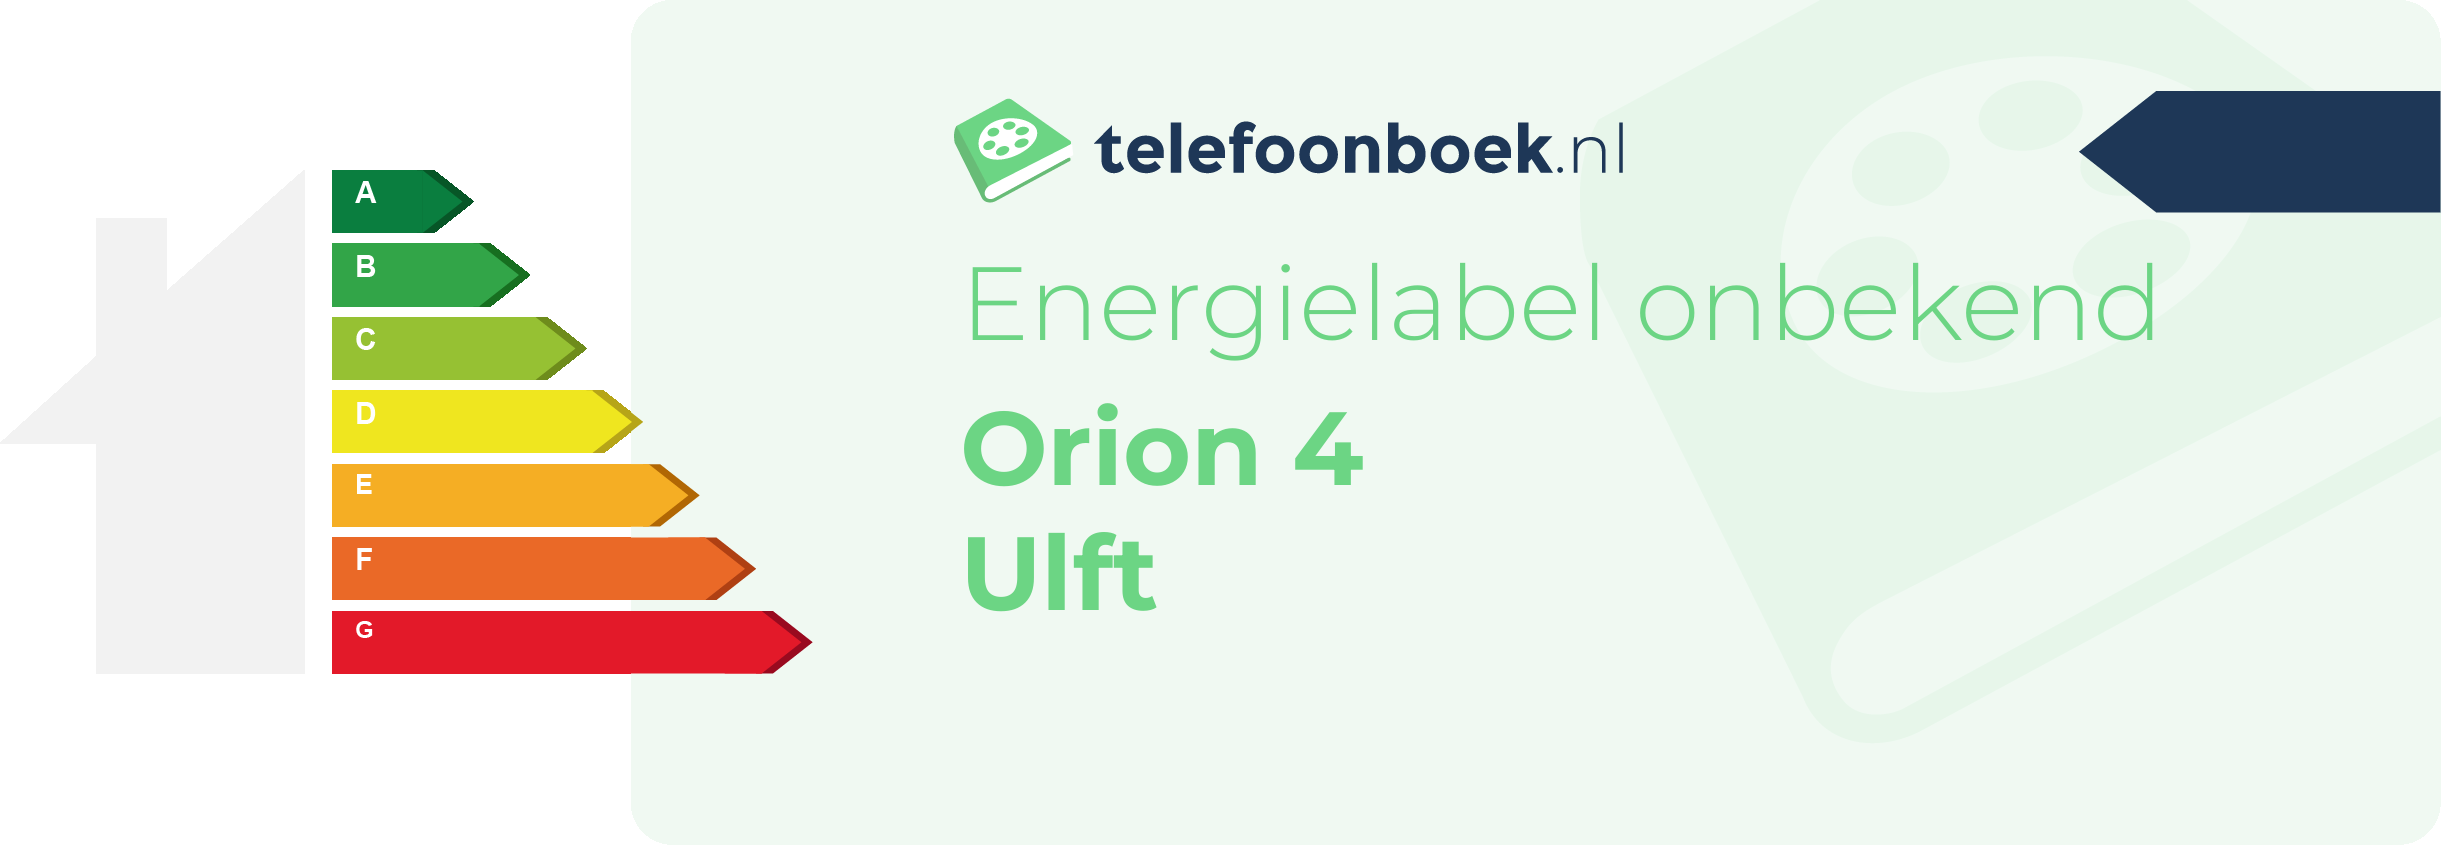 Energielabel Orion 4 Ulft